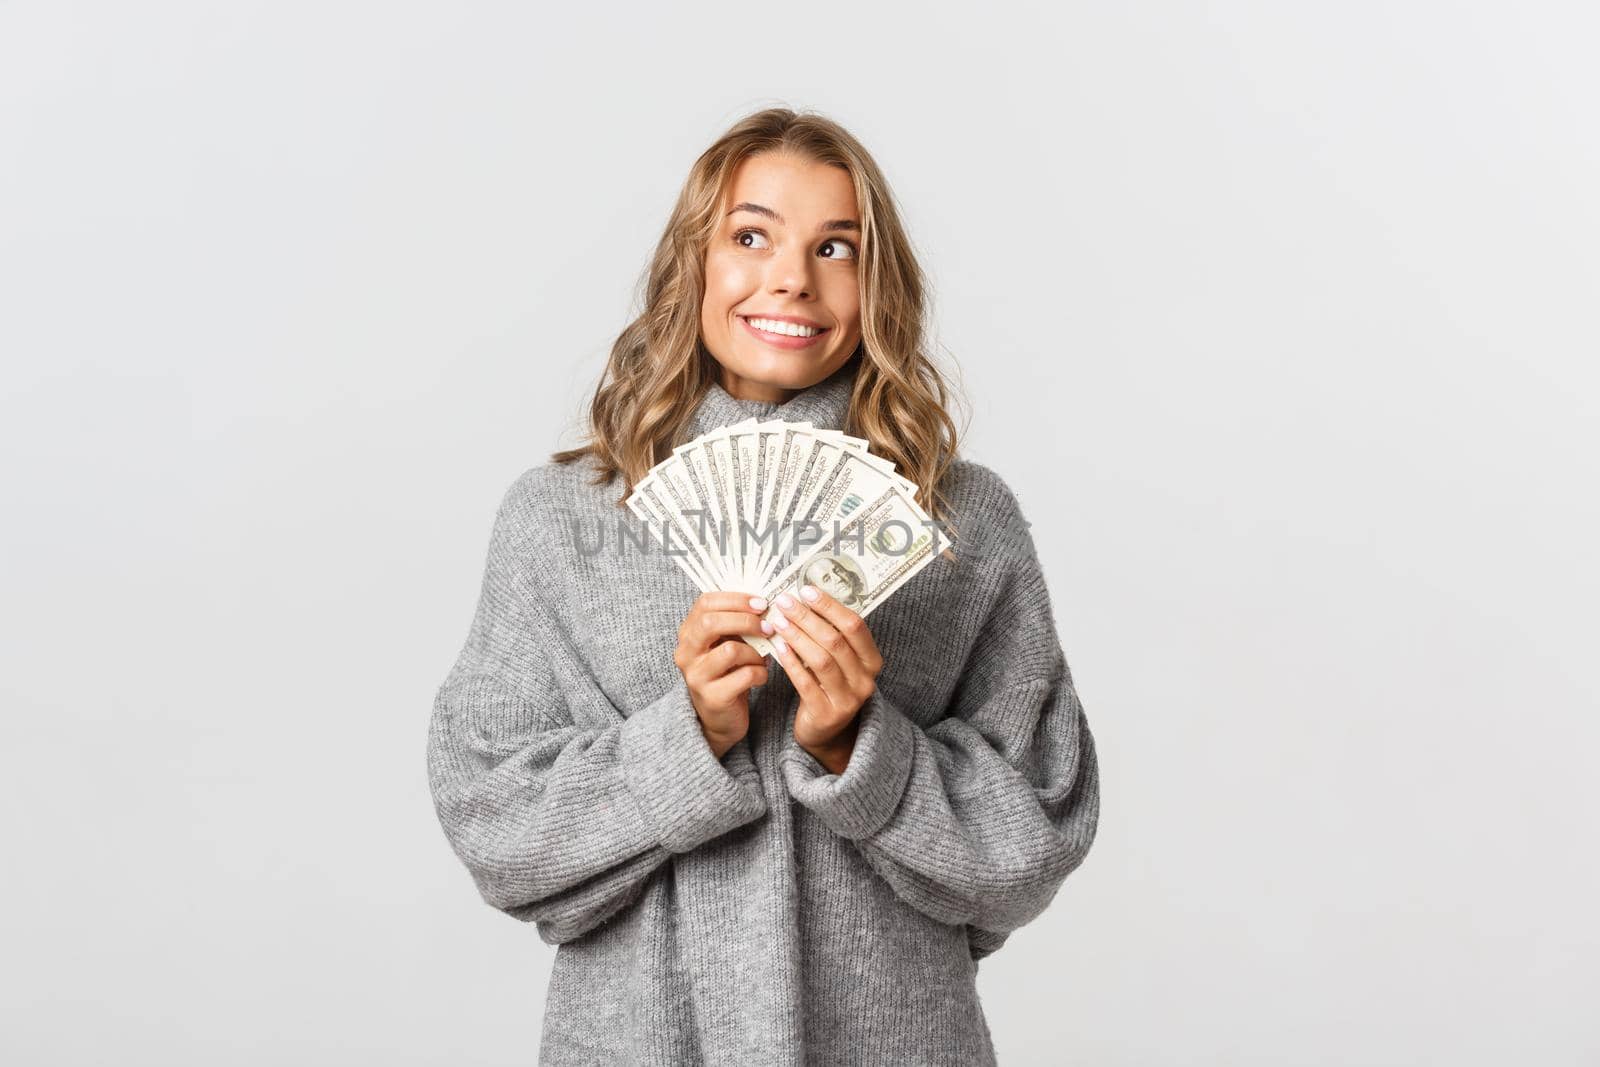 Portrait of dreamy cute girl in grey sweater, looking at upper left corner thoughtful and smiling, holding money, white background.